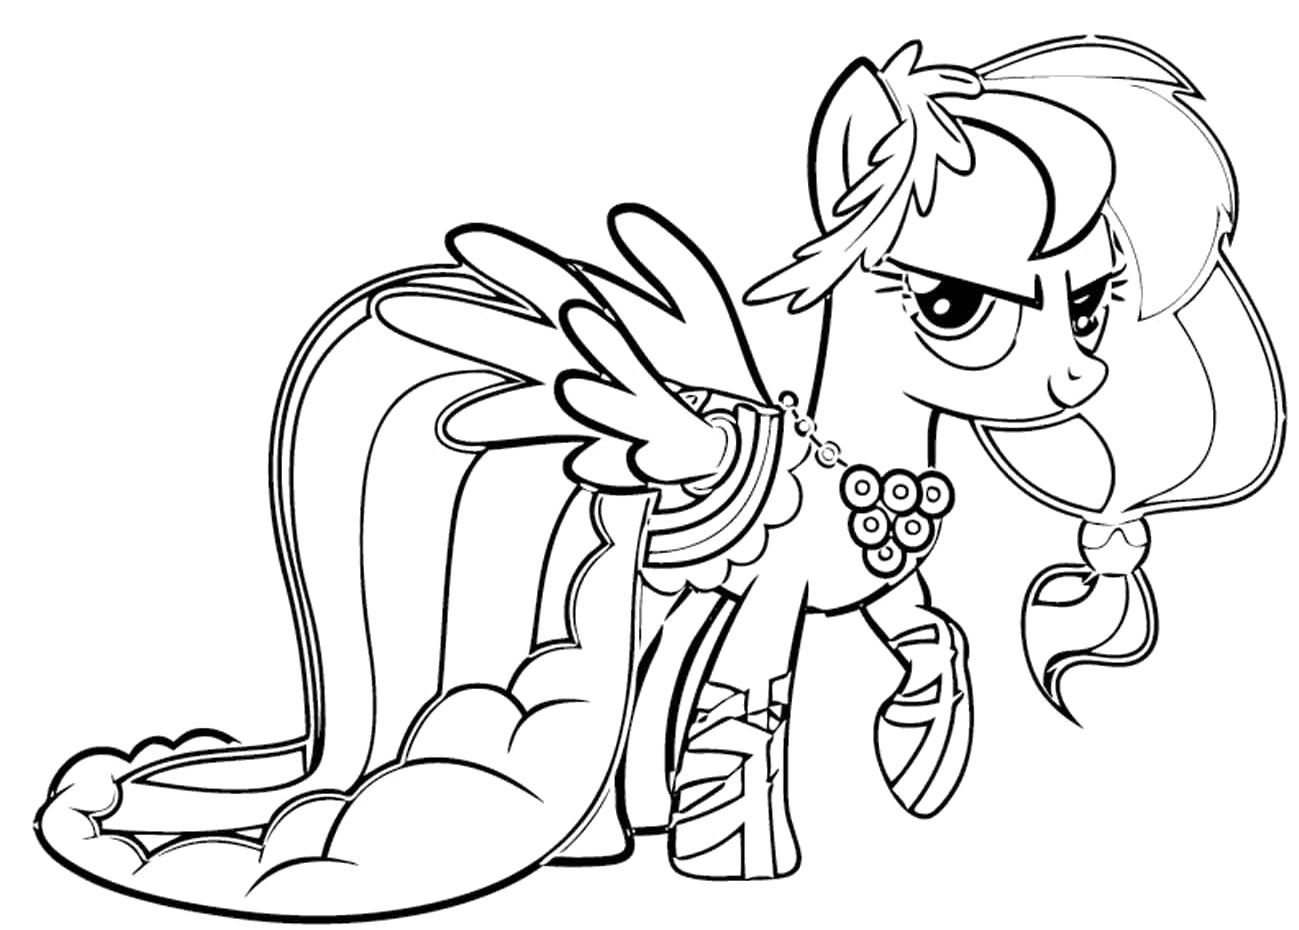 My Little Pony Rainbow Dash Coloring Pages My little pony coloring